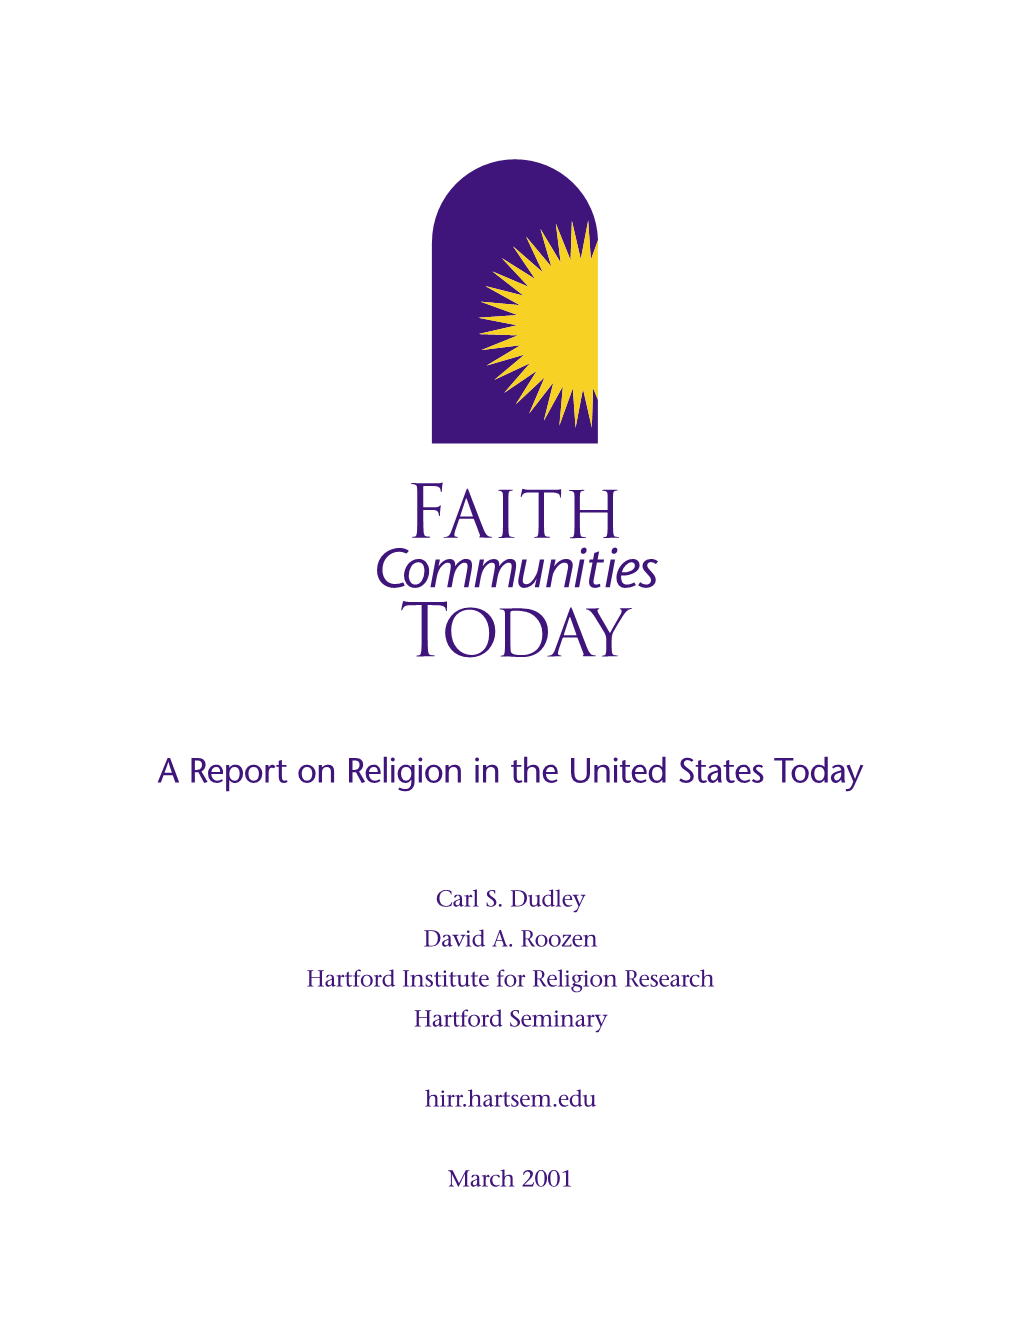 A Report on Religion in the United States Today